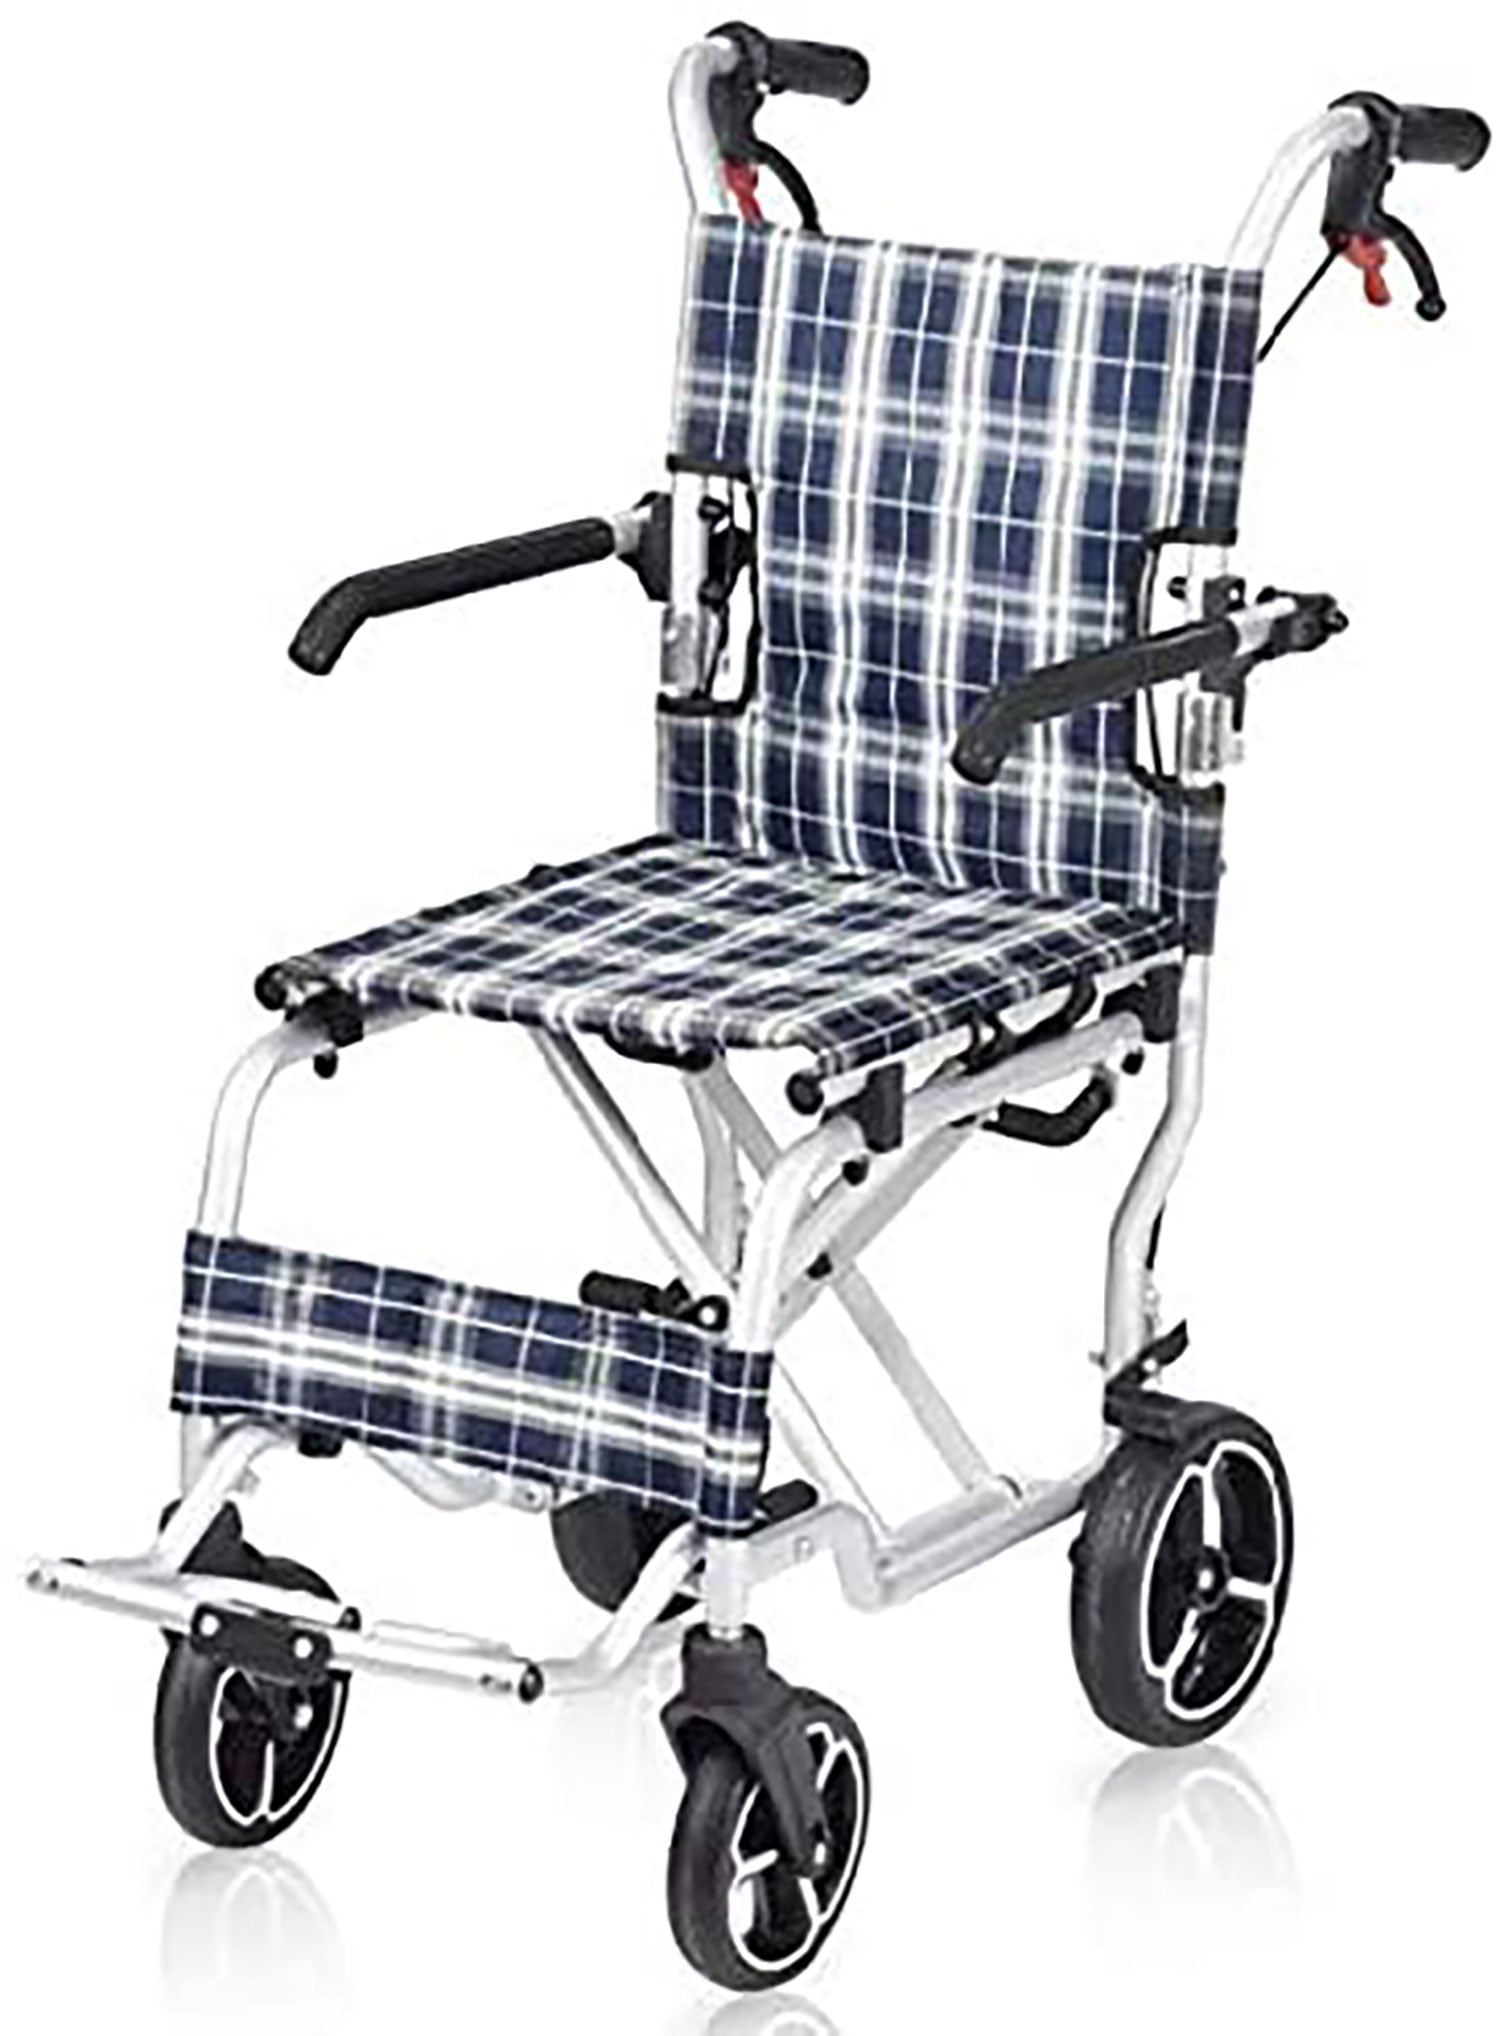 Wheelchair Transformer Lightweight Foldable Transport Chair With Foot Rests And Bag For Storage And Travel Walmart Com Walmart Com